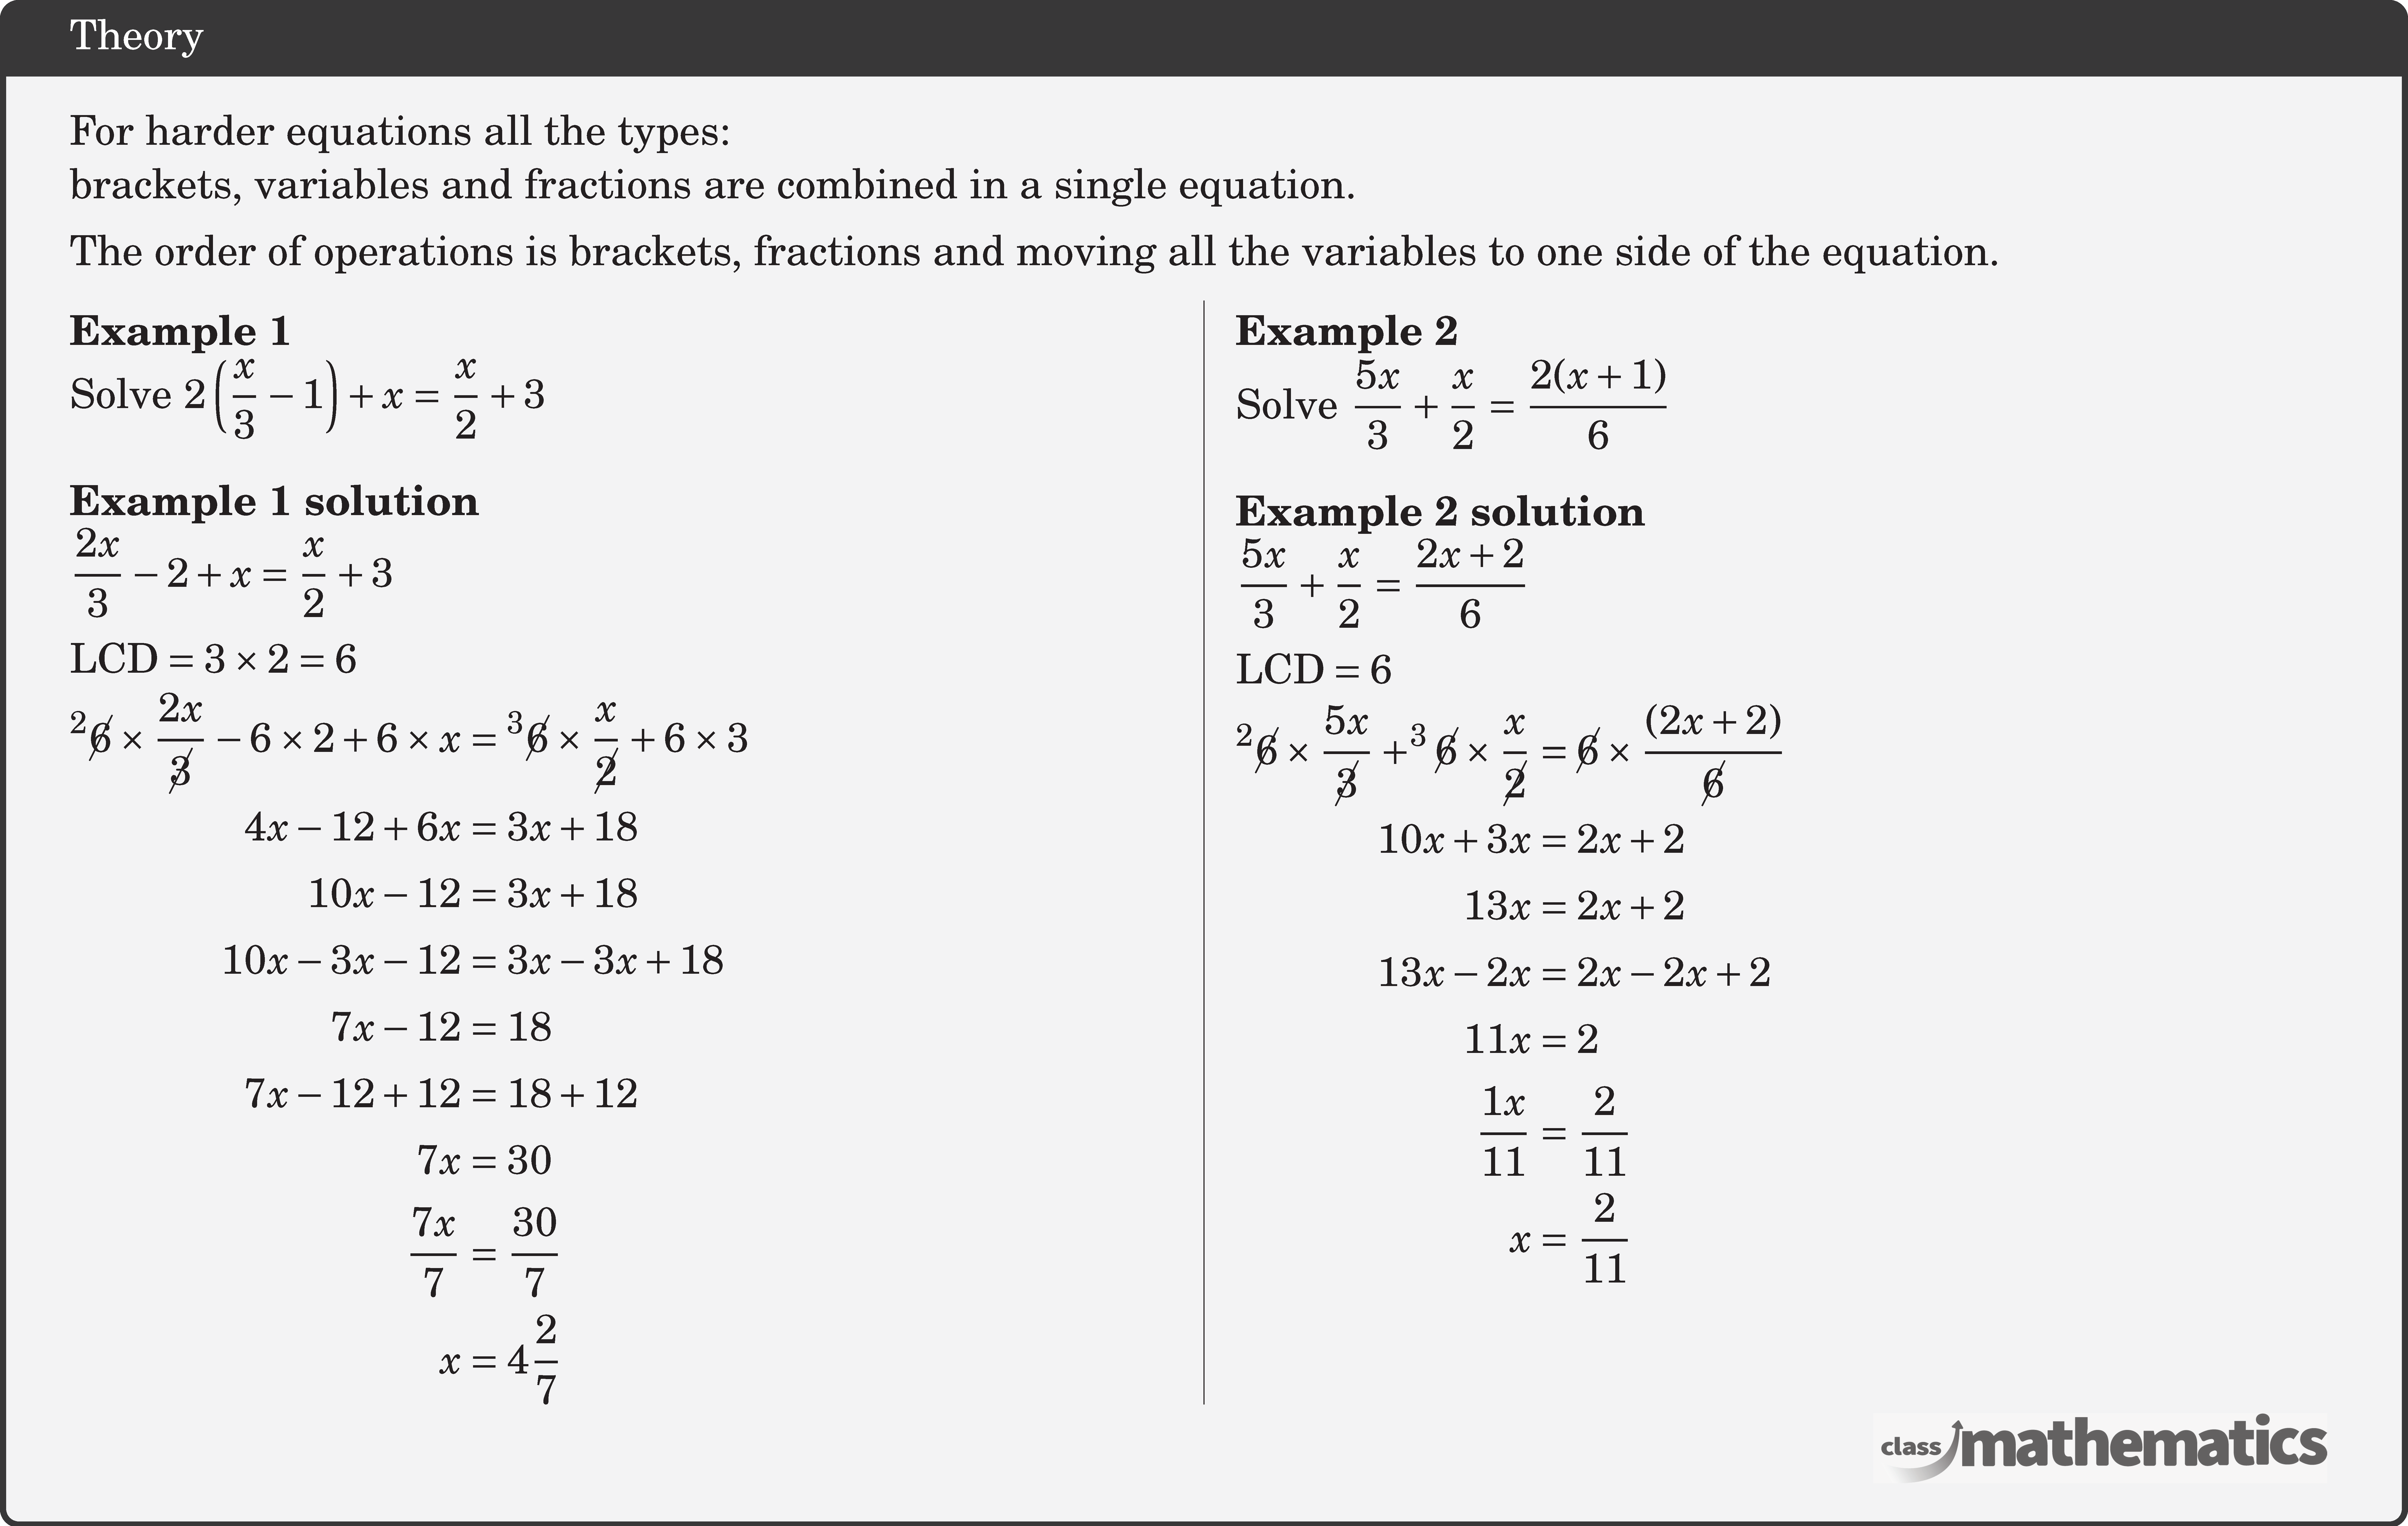 For harder equations all the types: \\ brackets, variables and fractions are combined in a single equation.\\[3pt]  The order of operations is brackets, fractions and moving all the variables to one side of the equation. \begin{multicols}{2}  \textbf{Example 1}\\ Solve \(2\left(\dfrac{x}{3}-1\right)+x=\dfrac{x}{2}+3\)\\  \textbf{Example 1 solution}\\ \(\begin{aligned} &\frac{2 x}{3}-2+x=\frac{x}{2}+3 \\ & \text{LCD}=3 \times 2=6  \end{aligned}\)\\ \(\begin{aligned} { }^2 \cancel{6} \times \frac{2 x}{\cancel{3}}-6 \times 2+6 \times x&={ }^3 \cancel{6}\times \frac{x}{\cancel{2}}+6 \times 3\\ 4 x-12+6 x&=3 x+18 \\ 10 x-12&=3 x+18 \\ 10 x-3 x-12&=3 x-3 x+18 \\ 7 x-12&=18 \\ 7 x-12+12&=18+12 \\ 7 x&=30 \\ \frac{7 x}{7}&=\frac{30}{7} \\ x&=4 \frac{2}{7} \\ \end{aligned}\)  \columnbreak \textbf{Example 2}\\ Solve \(\dfrac{5 x}{3}+\dfrac{x}{2}= \dfrac{2(x+1)}{6}\)\\  \textbf{Example 2 solution}\\ \(\begin{aligned} &\frac{5 x}{3}+\frac{x}{2}=\frac{2 x+2}{6}\\ &\text{LCD}=6   \end{aligned}\)\\ \(\begin{aligned} ^{2}\cancel{6} \times \frac{5 x}{\cancel{3}}+^{3}\cancel{6} \times \frac{x}{\cancel{2}} & =\cancel{6} \times\frac{(2 x+2)}{\cancel{6}} \\ 10 x+3 x & =2 x+2 \\ 13 x & =2 x+2 \\ 13 x-2 x & =2 x-2 x+2 \\ 11 x & =2 \\ \frac{1 x}{11} & =\frac{2}{11} \\ x & =\frac{2}{11} \end{aligned}\) \end{multicols}